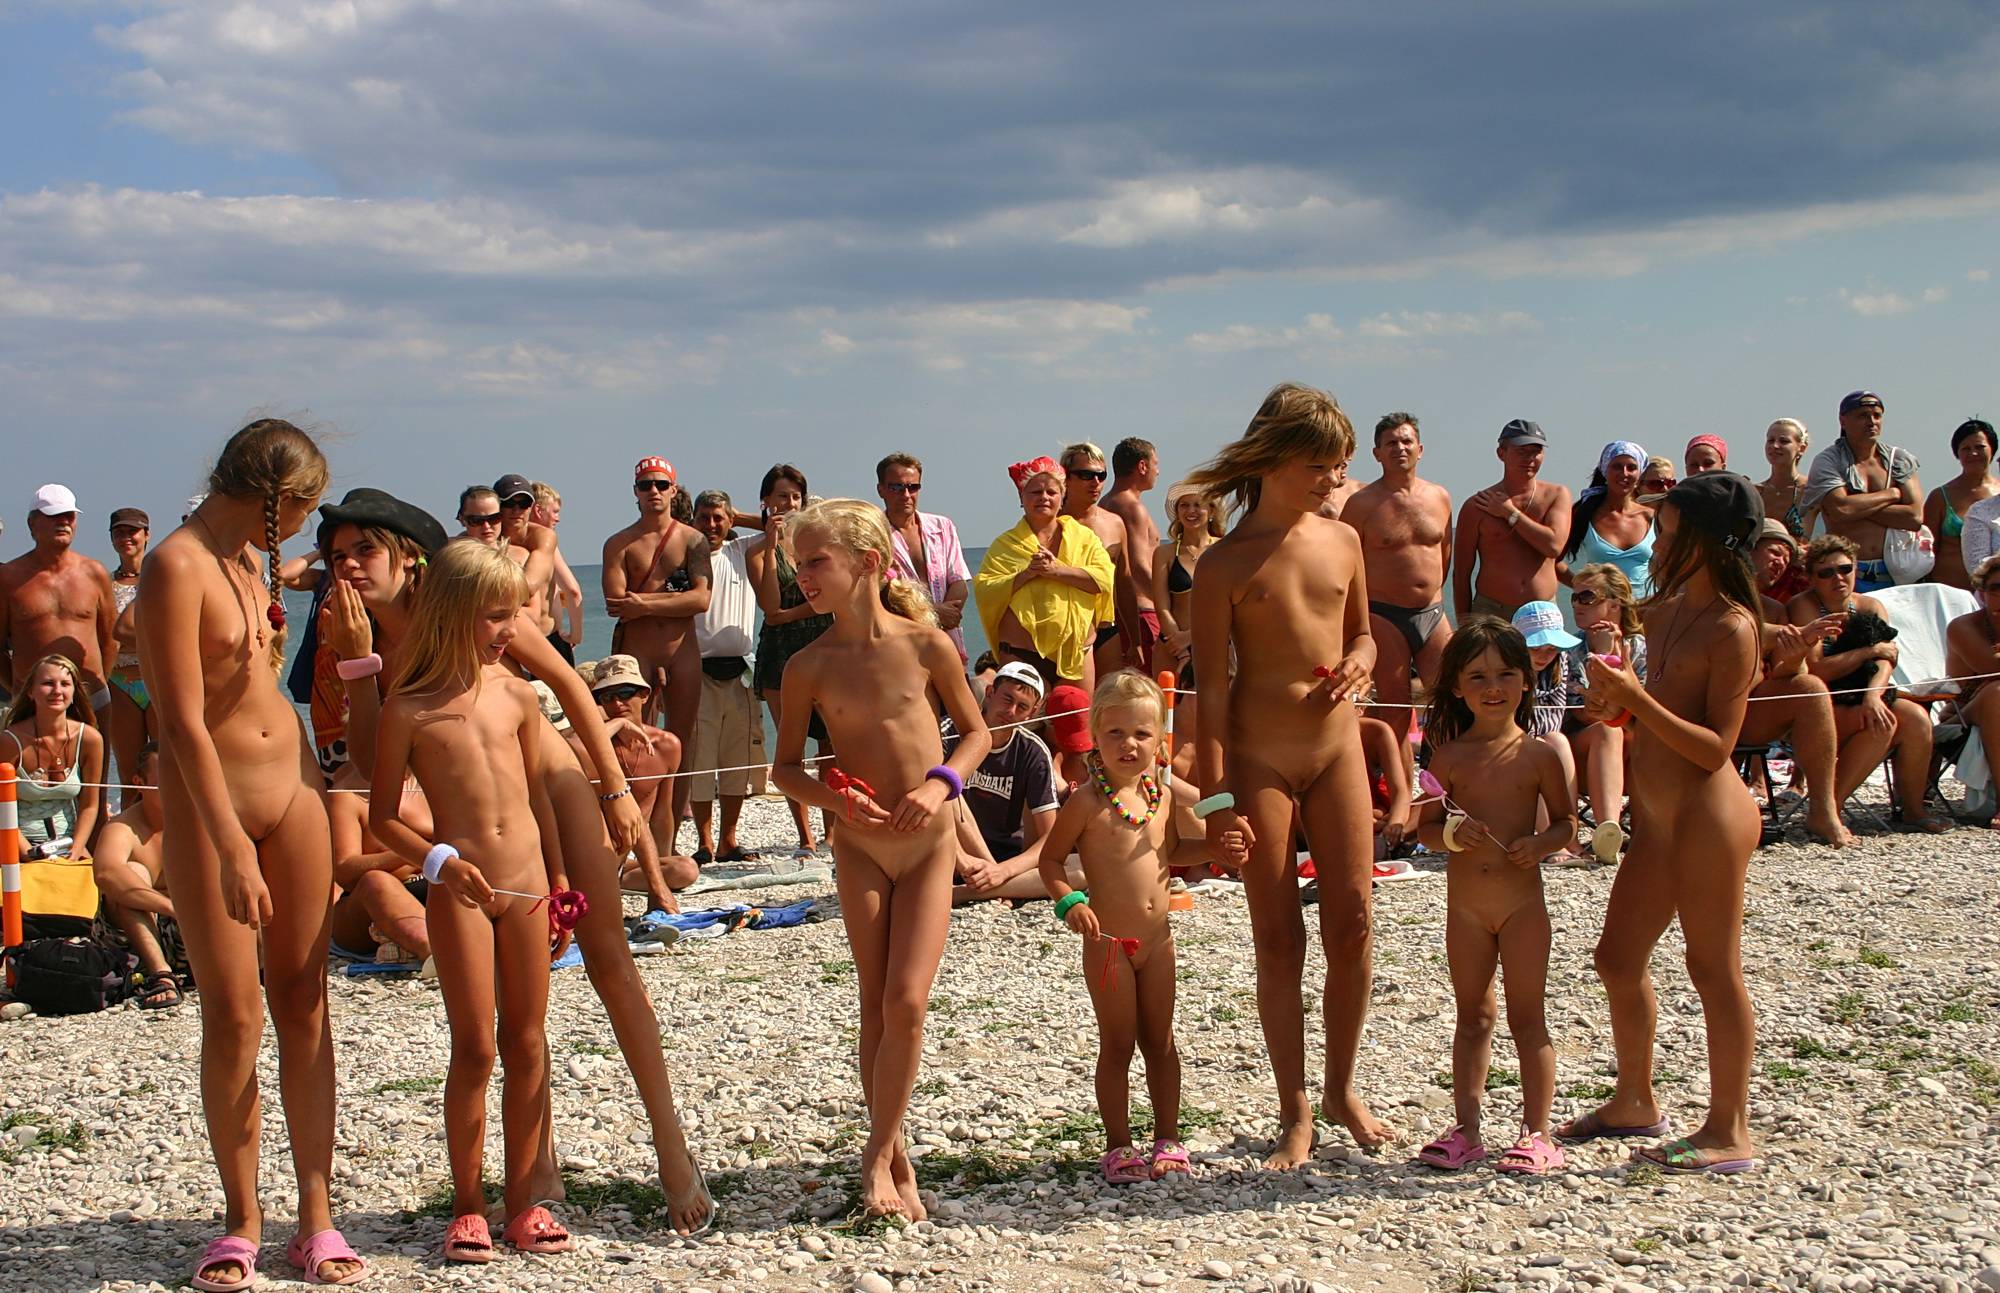 Pure Nudism Photos-Large Family Sun Party - 1